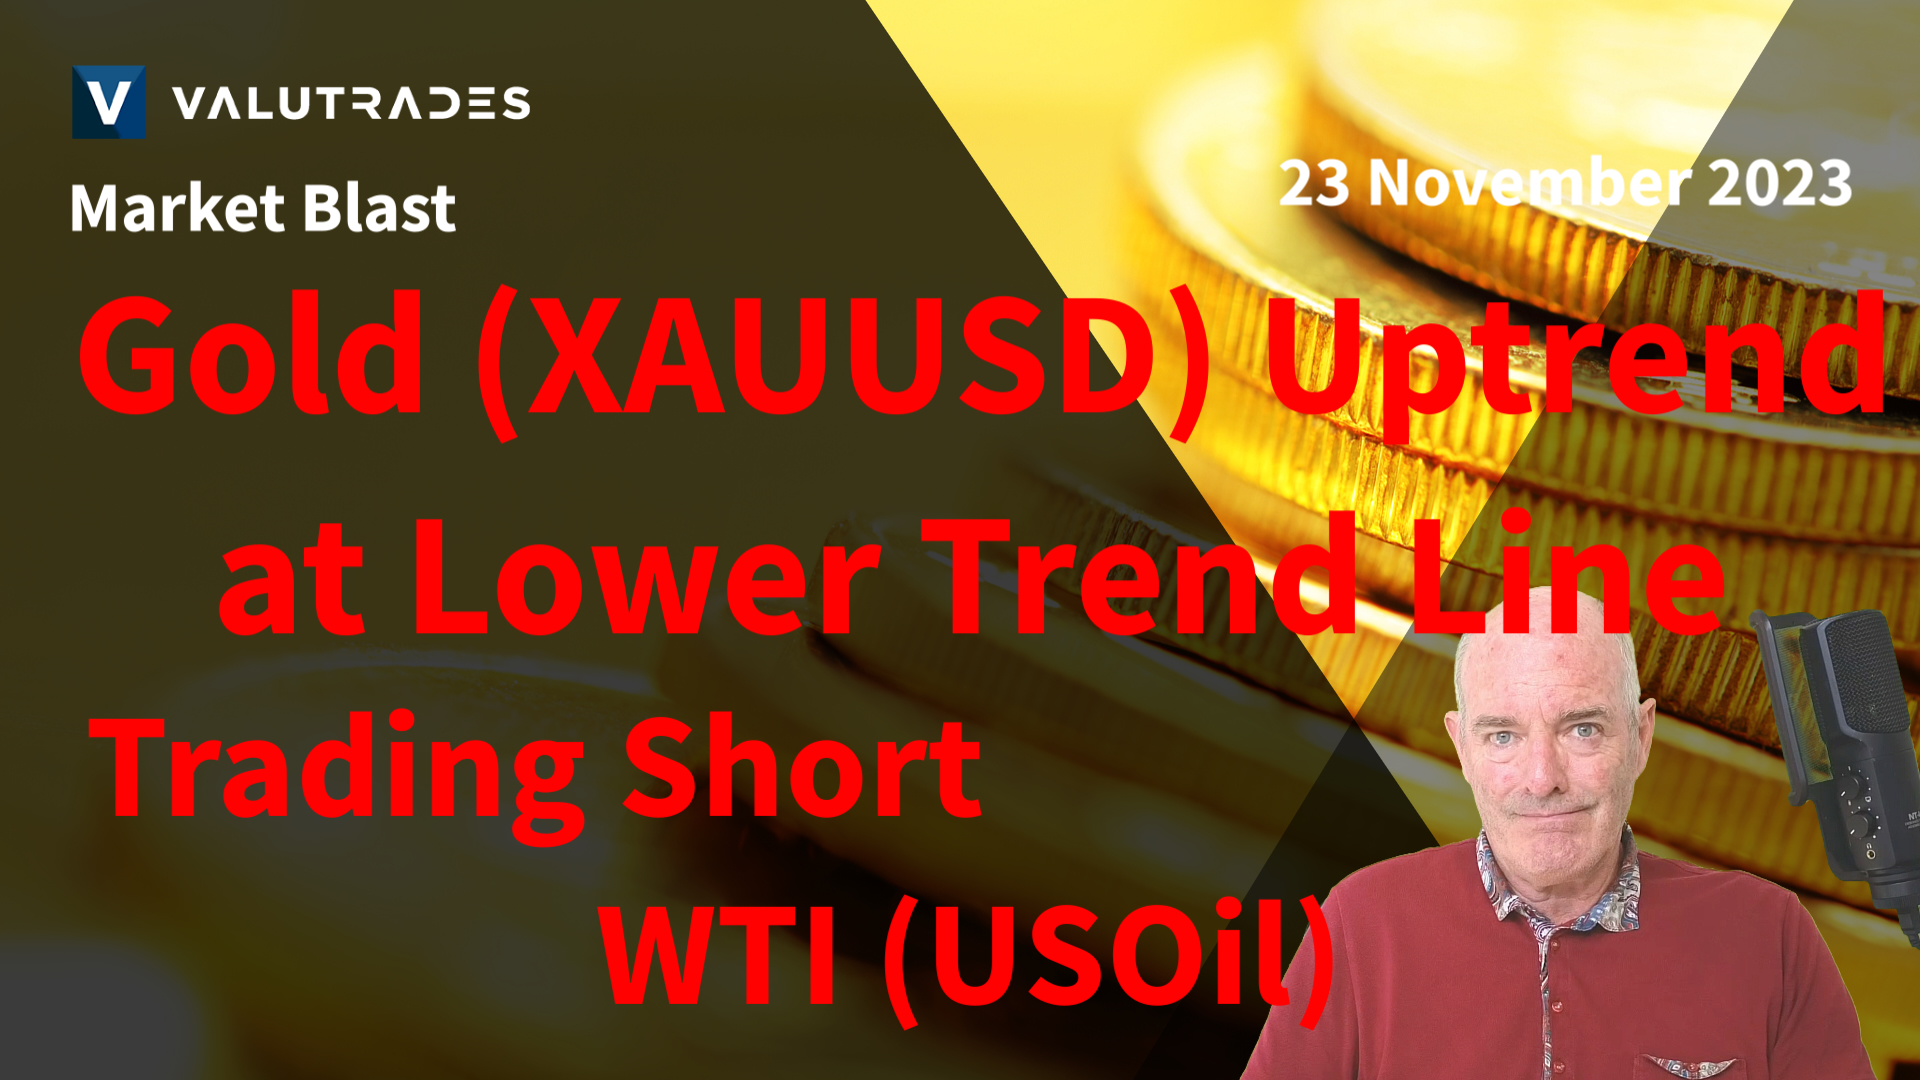 Trading Short WTI (USOil).  Gold (XAUUSD) Uptrend at Lower Trend Line. Death Cross on DJIA (US30)?